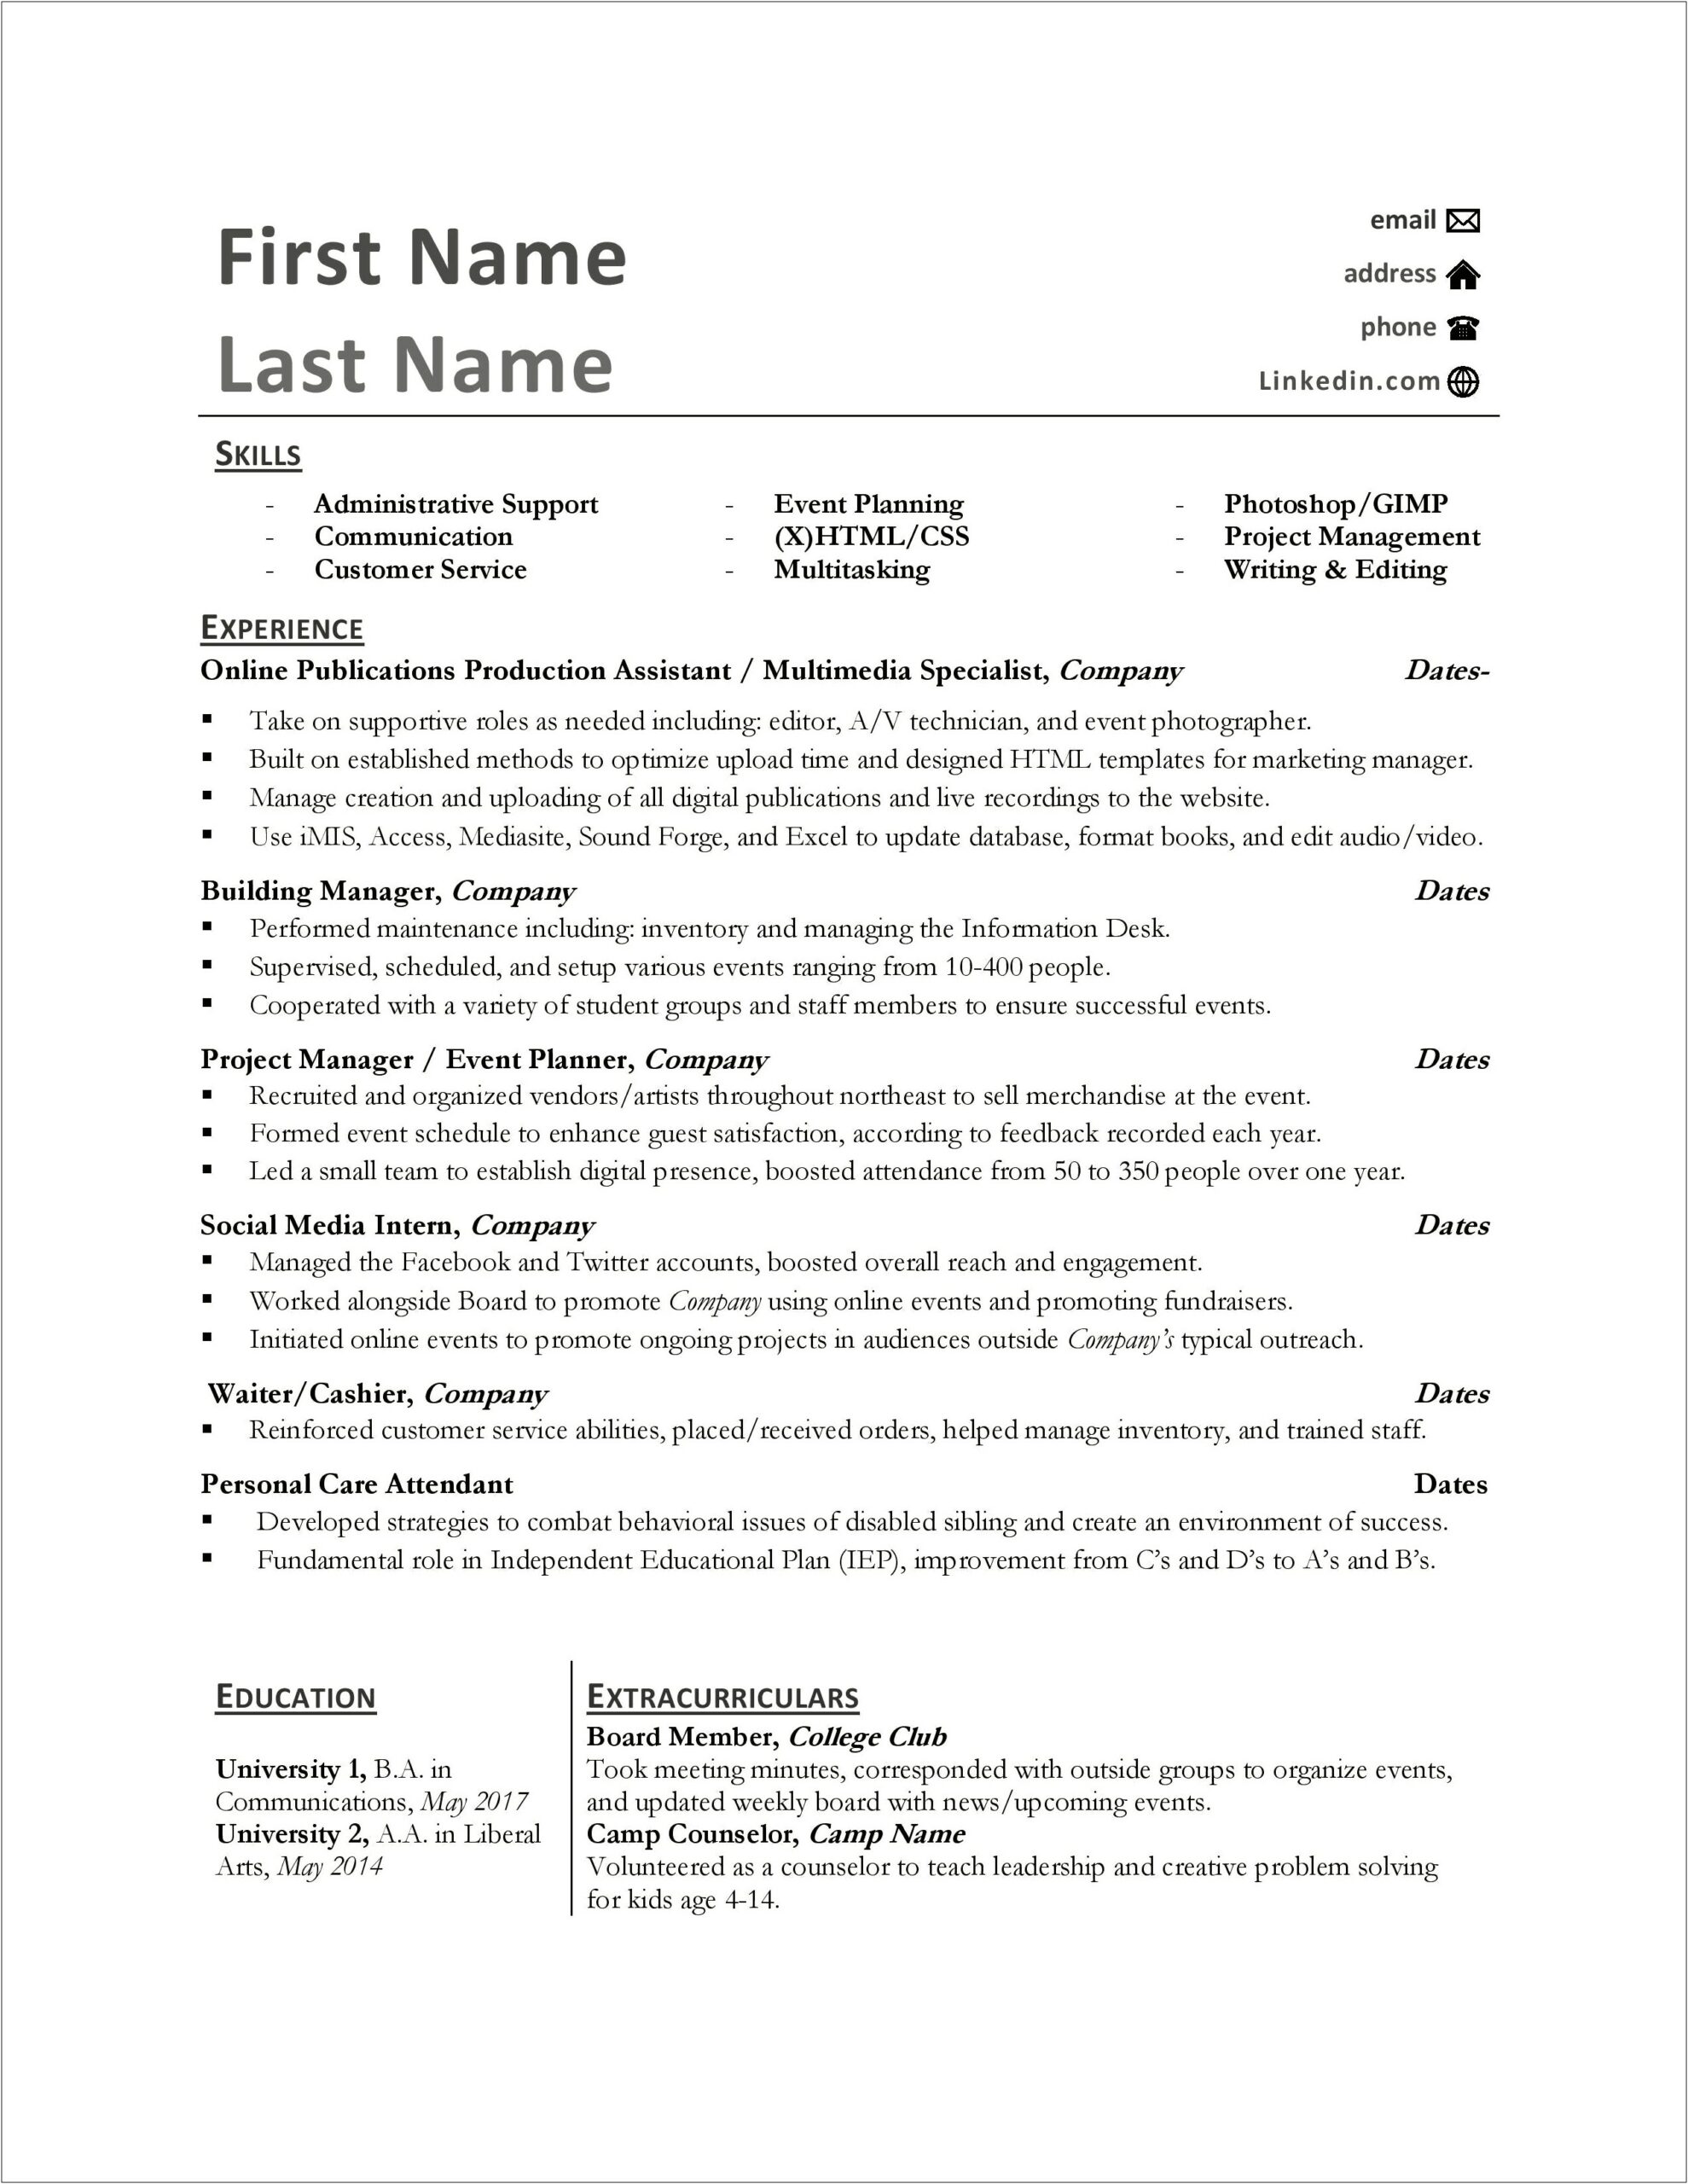 Sample Resume Showing Multiple Positions Same Company